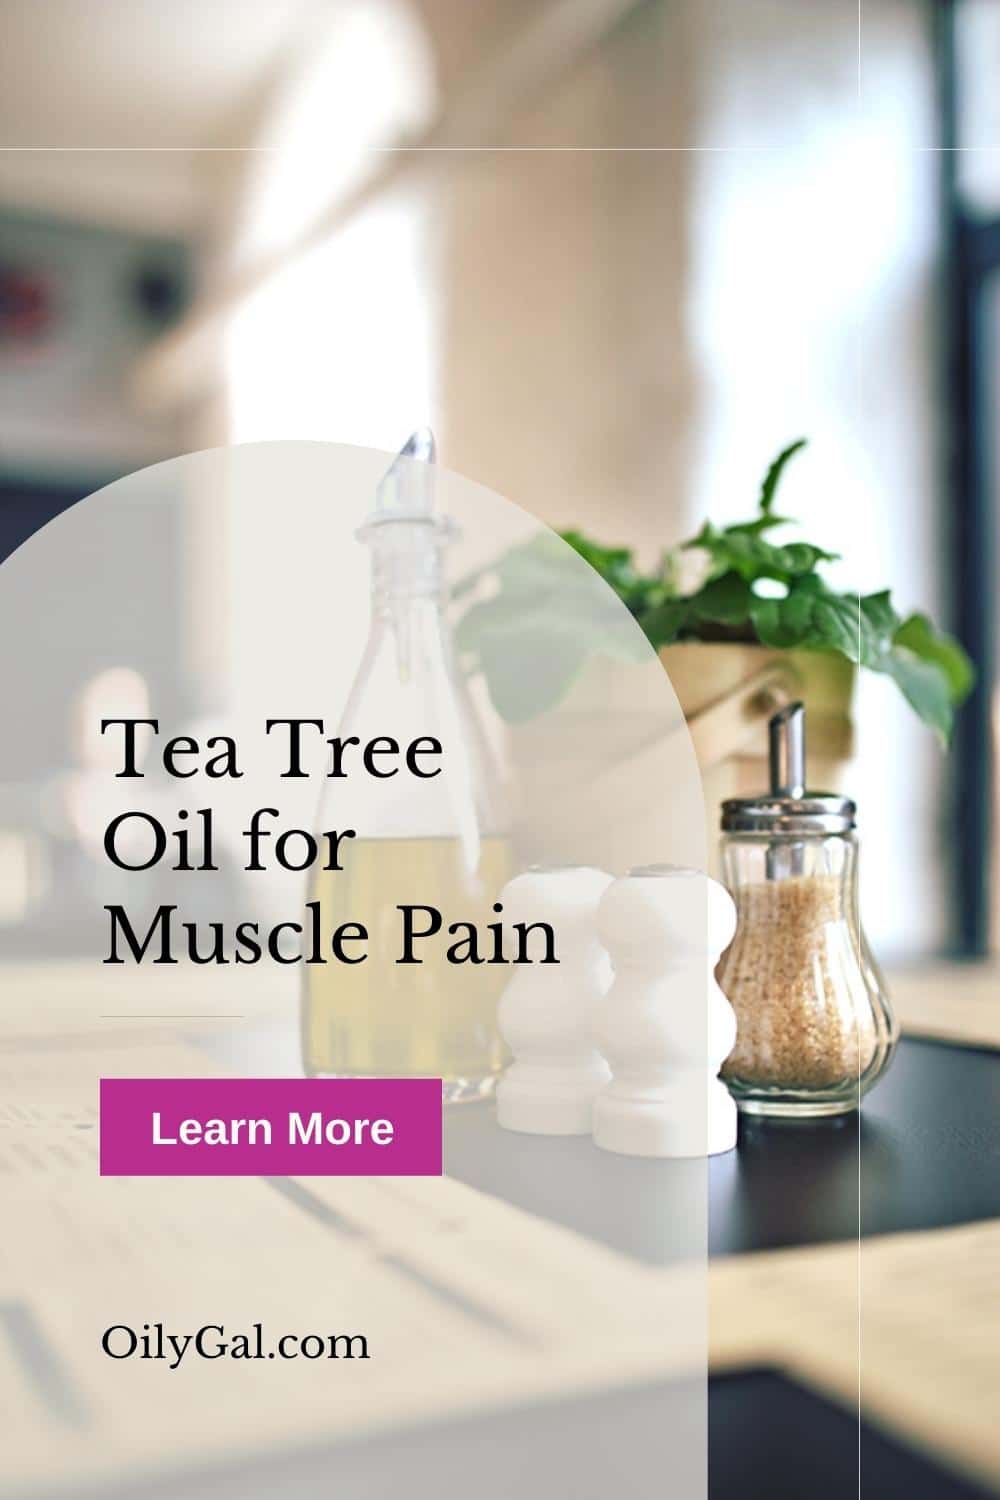 Tea Tree Oil for Muscle Pain